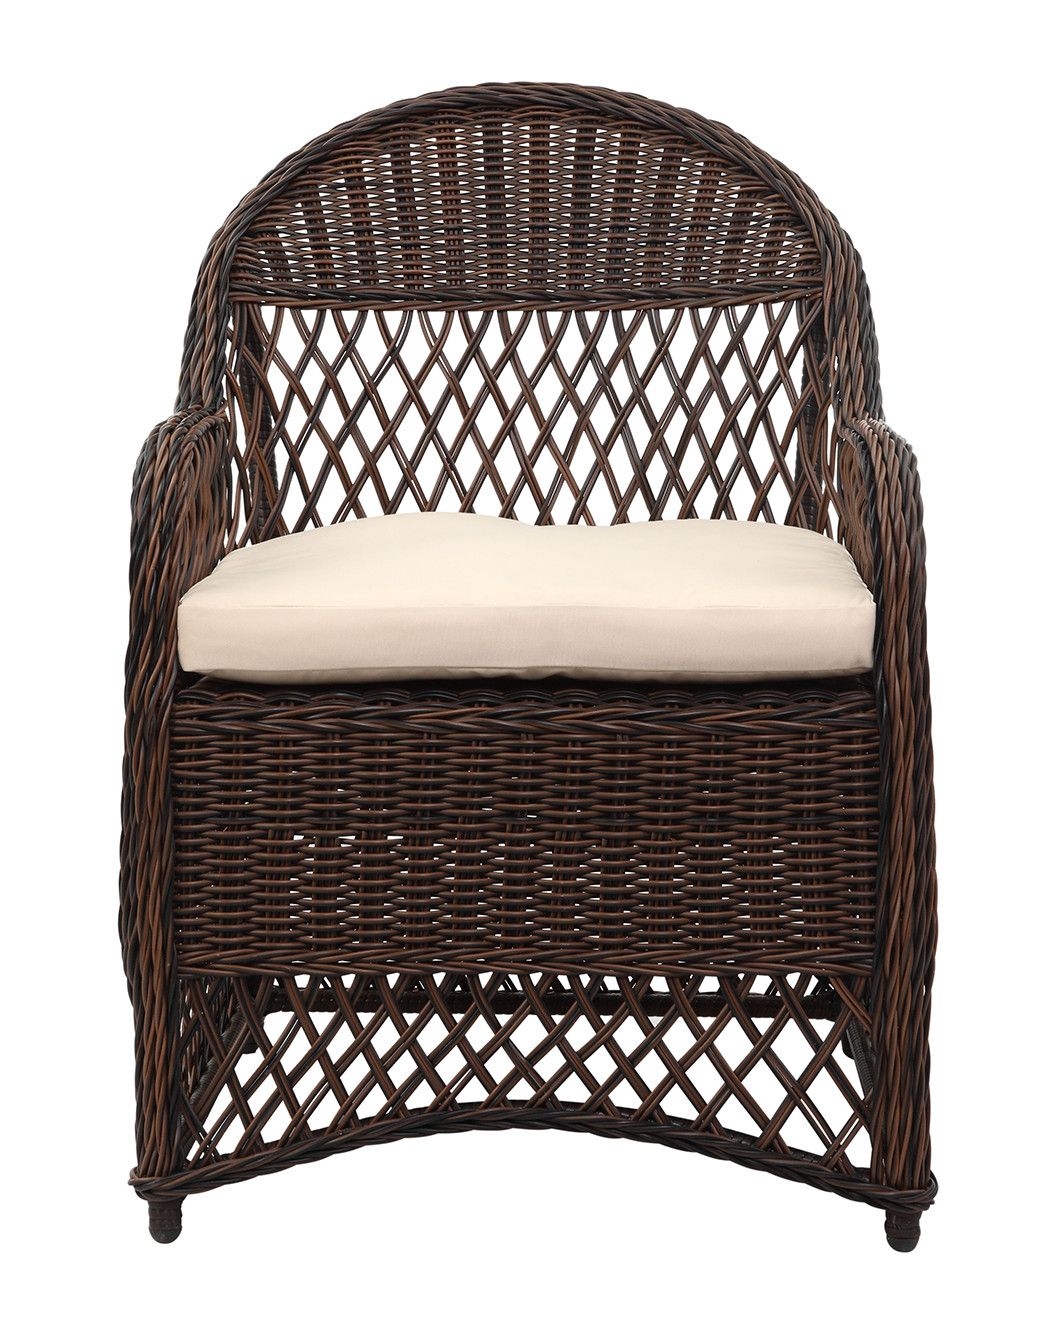 Davies Outdoor Wicker Arm Chair With Cushion | Gilt